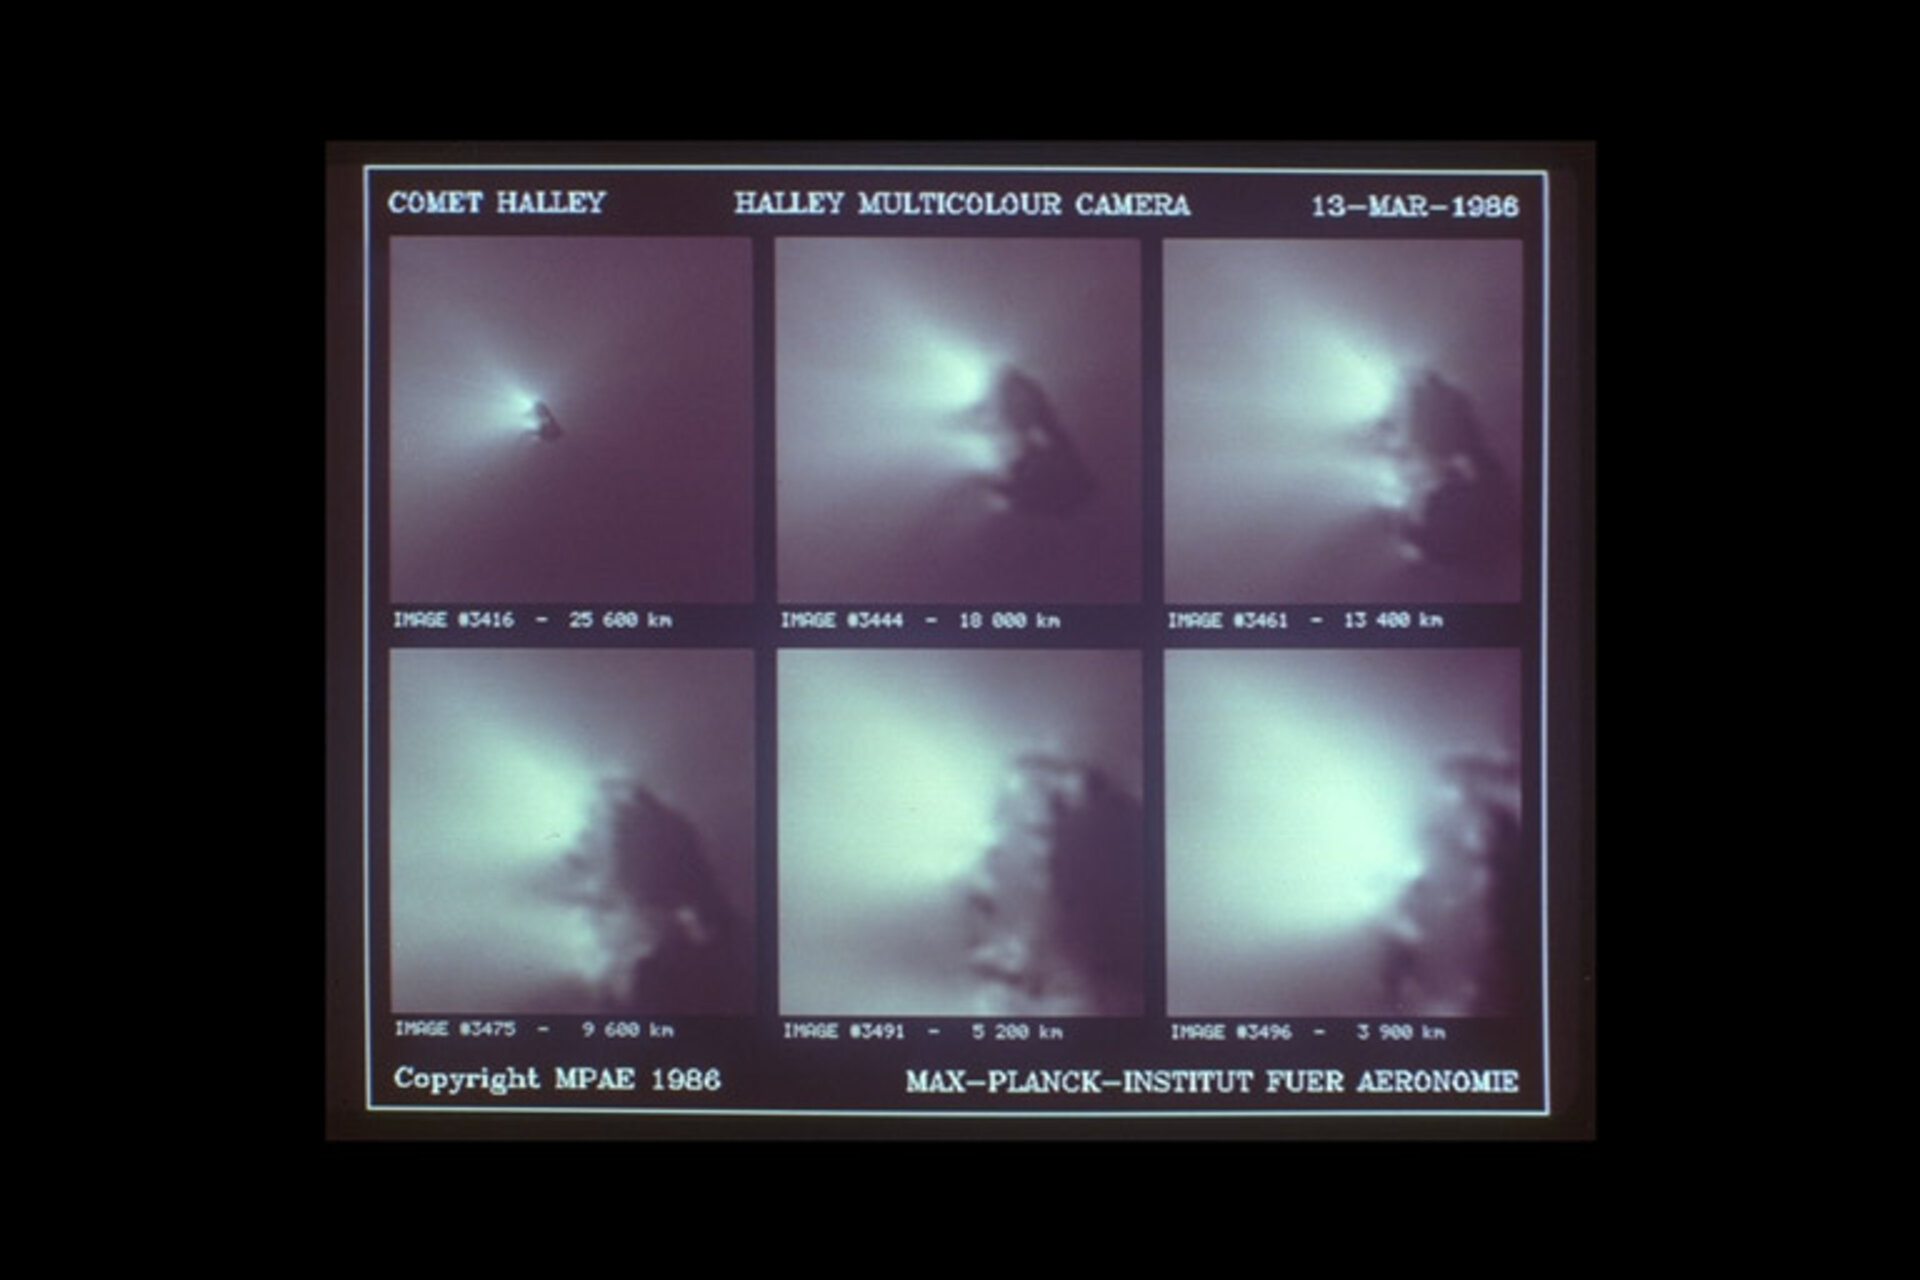 Giotto images of Comet Halley